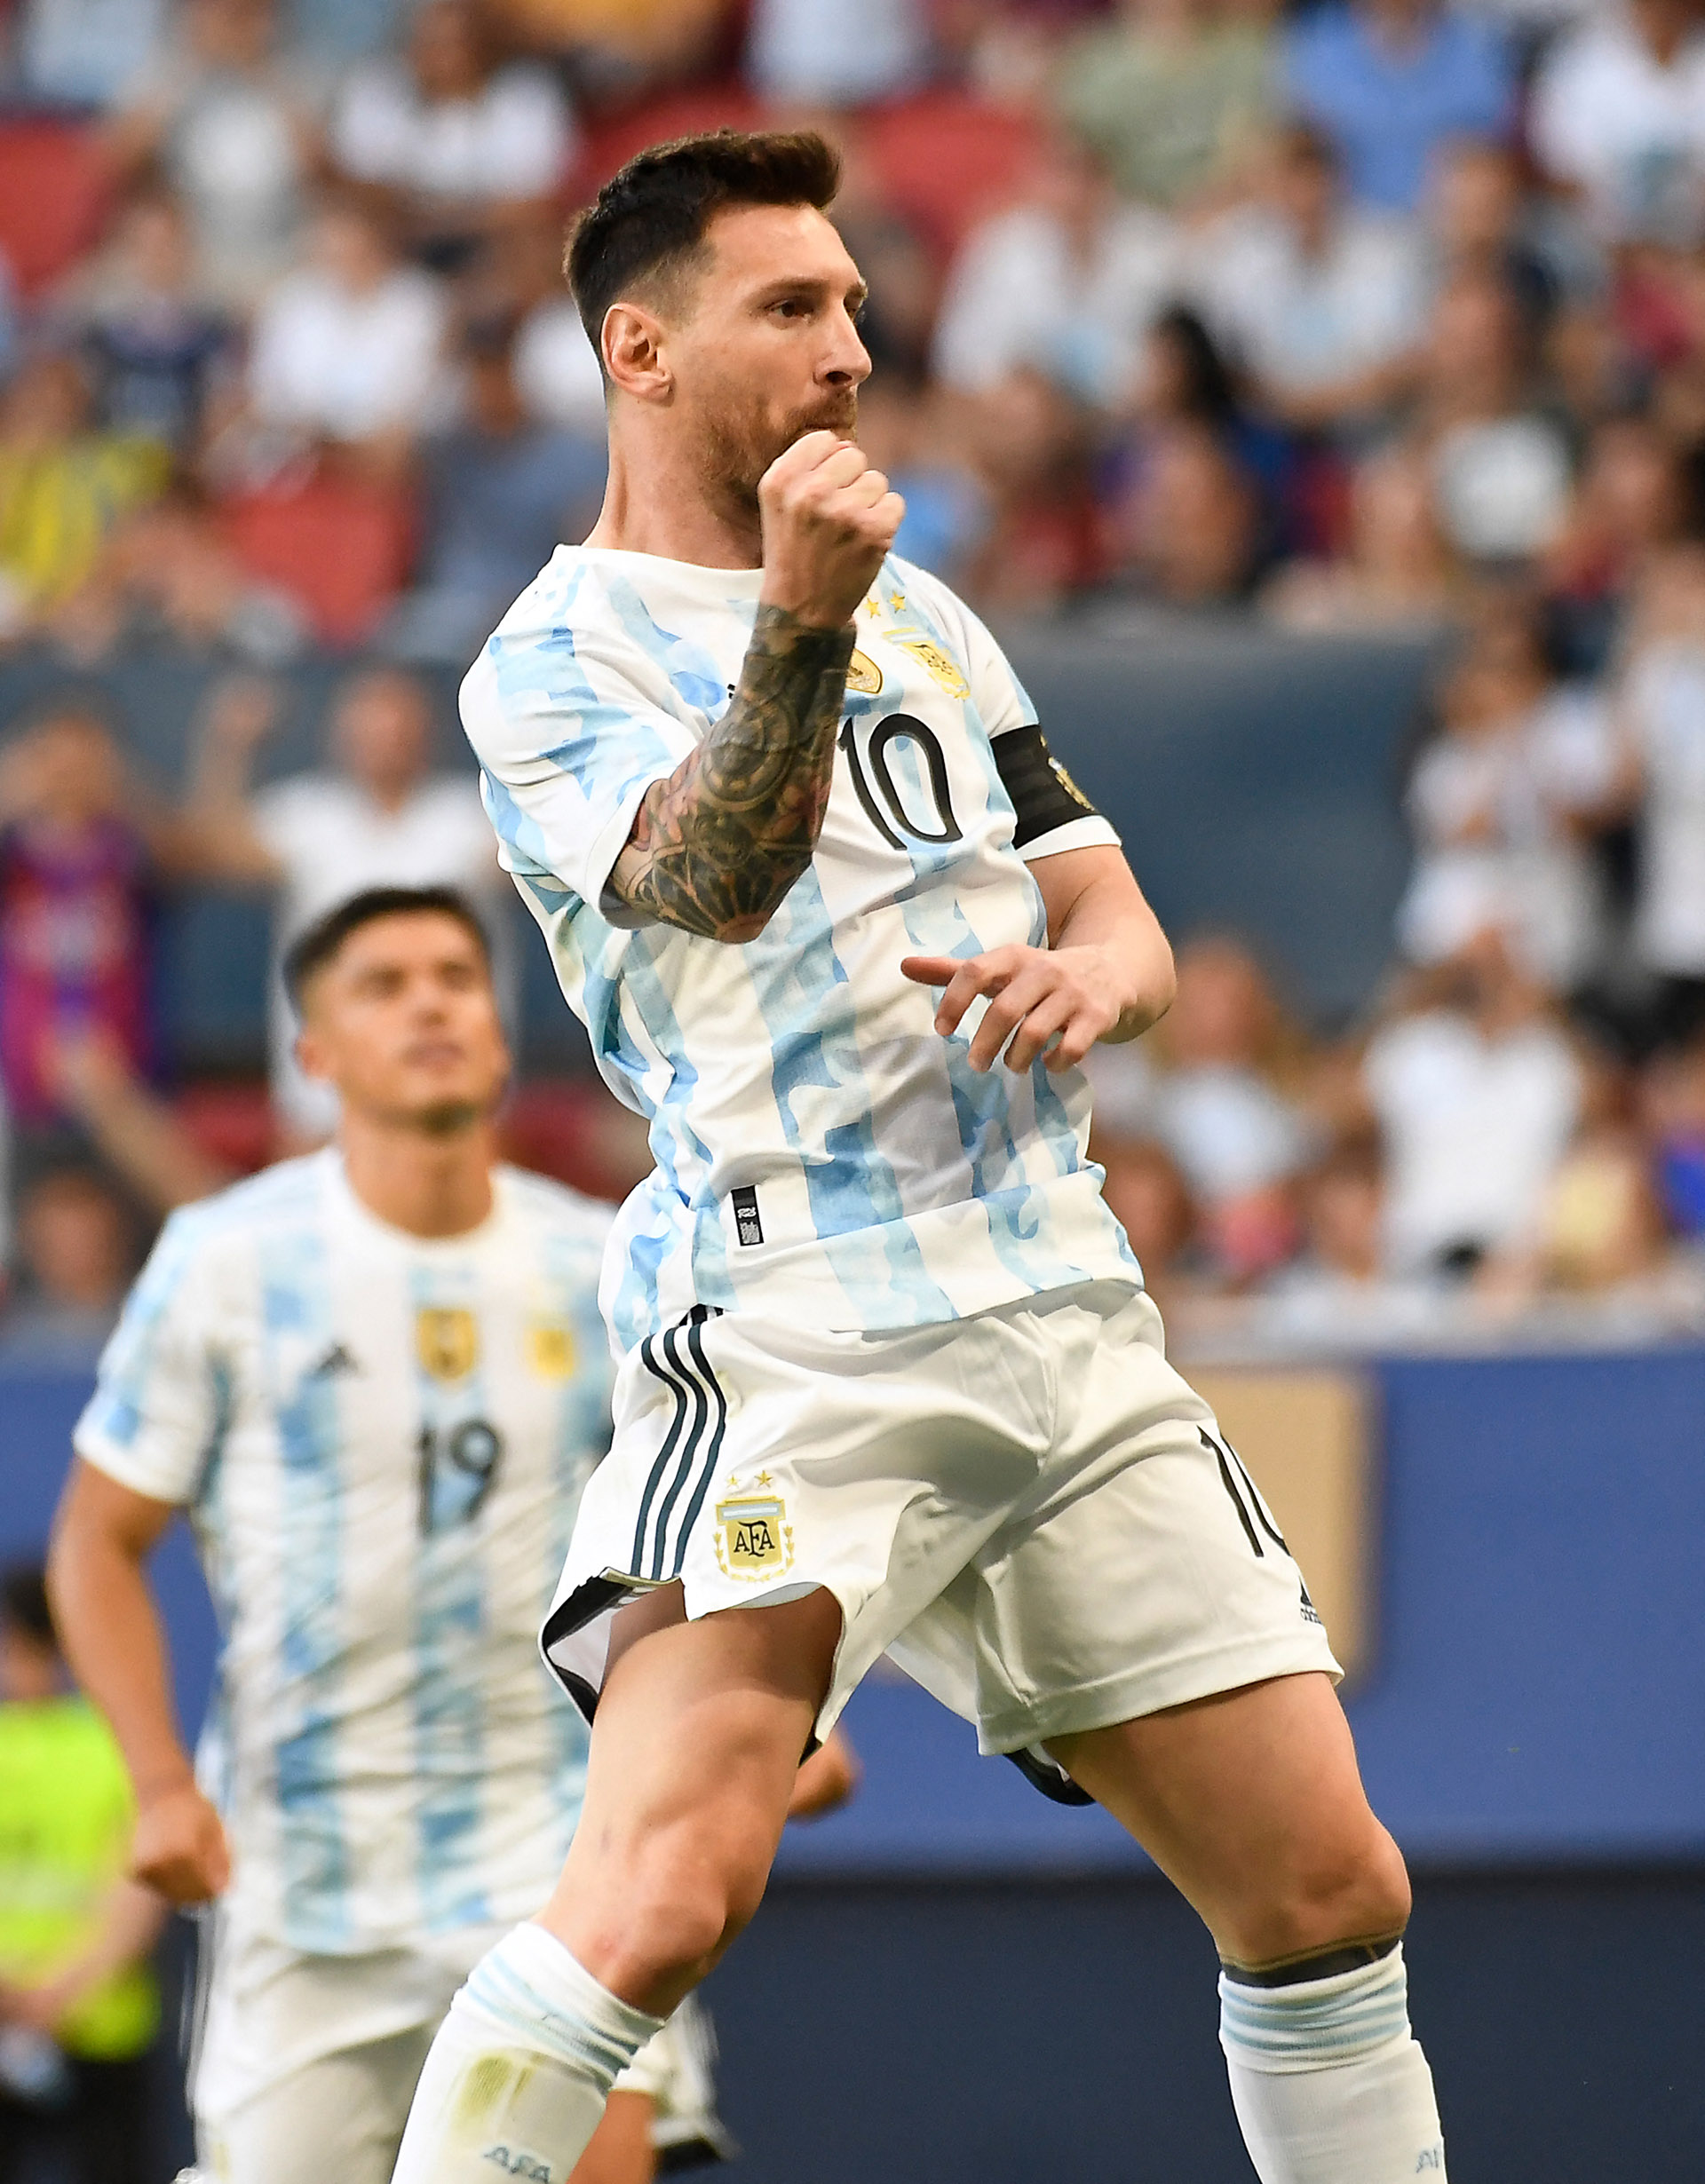 Argentine Lionel Messi celebrates after scoring his team's first goal during the international friendly soccer match between Argentina and Estonia at El Sadar Stadium in Pamplona on June 5, 2022 (Photo by ANDER Gillenea / AFP)